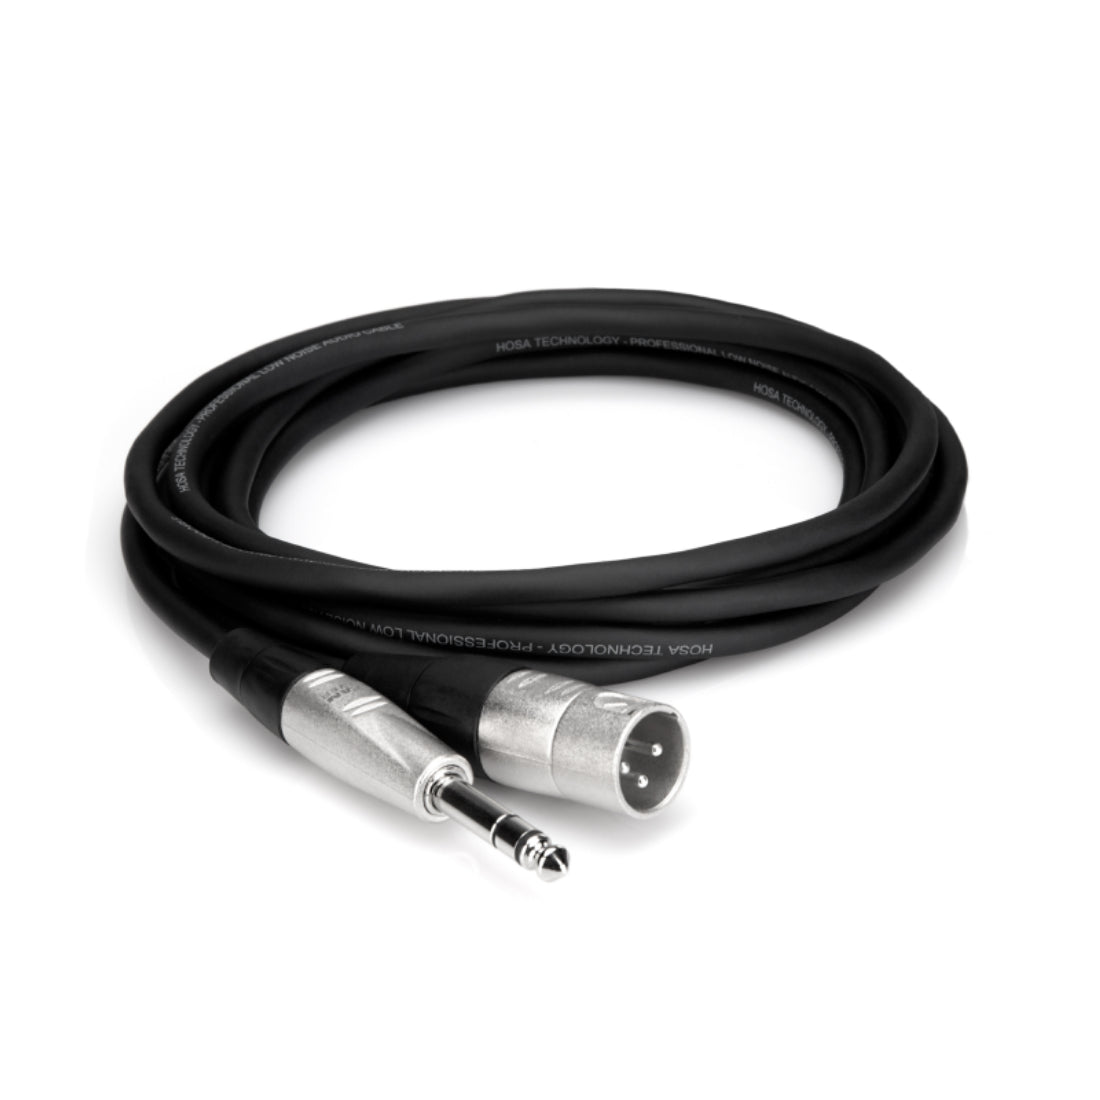 Hosa HSX-015 15ft Pro Cable - XLRM to 1/4 TRS M